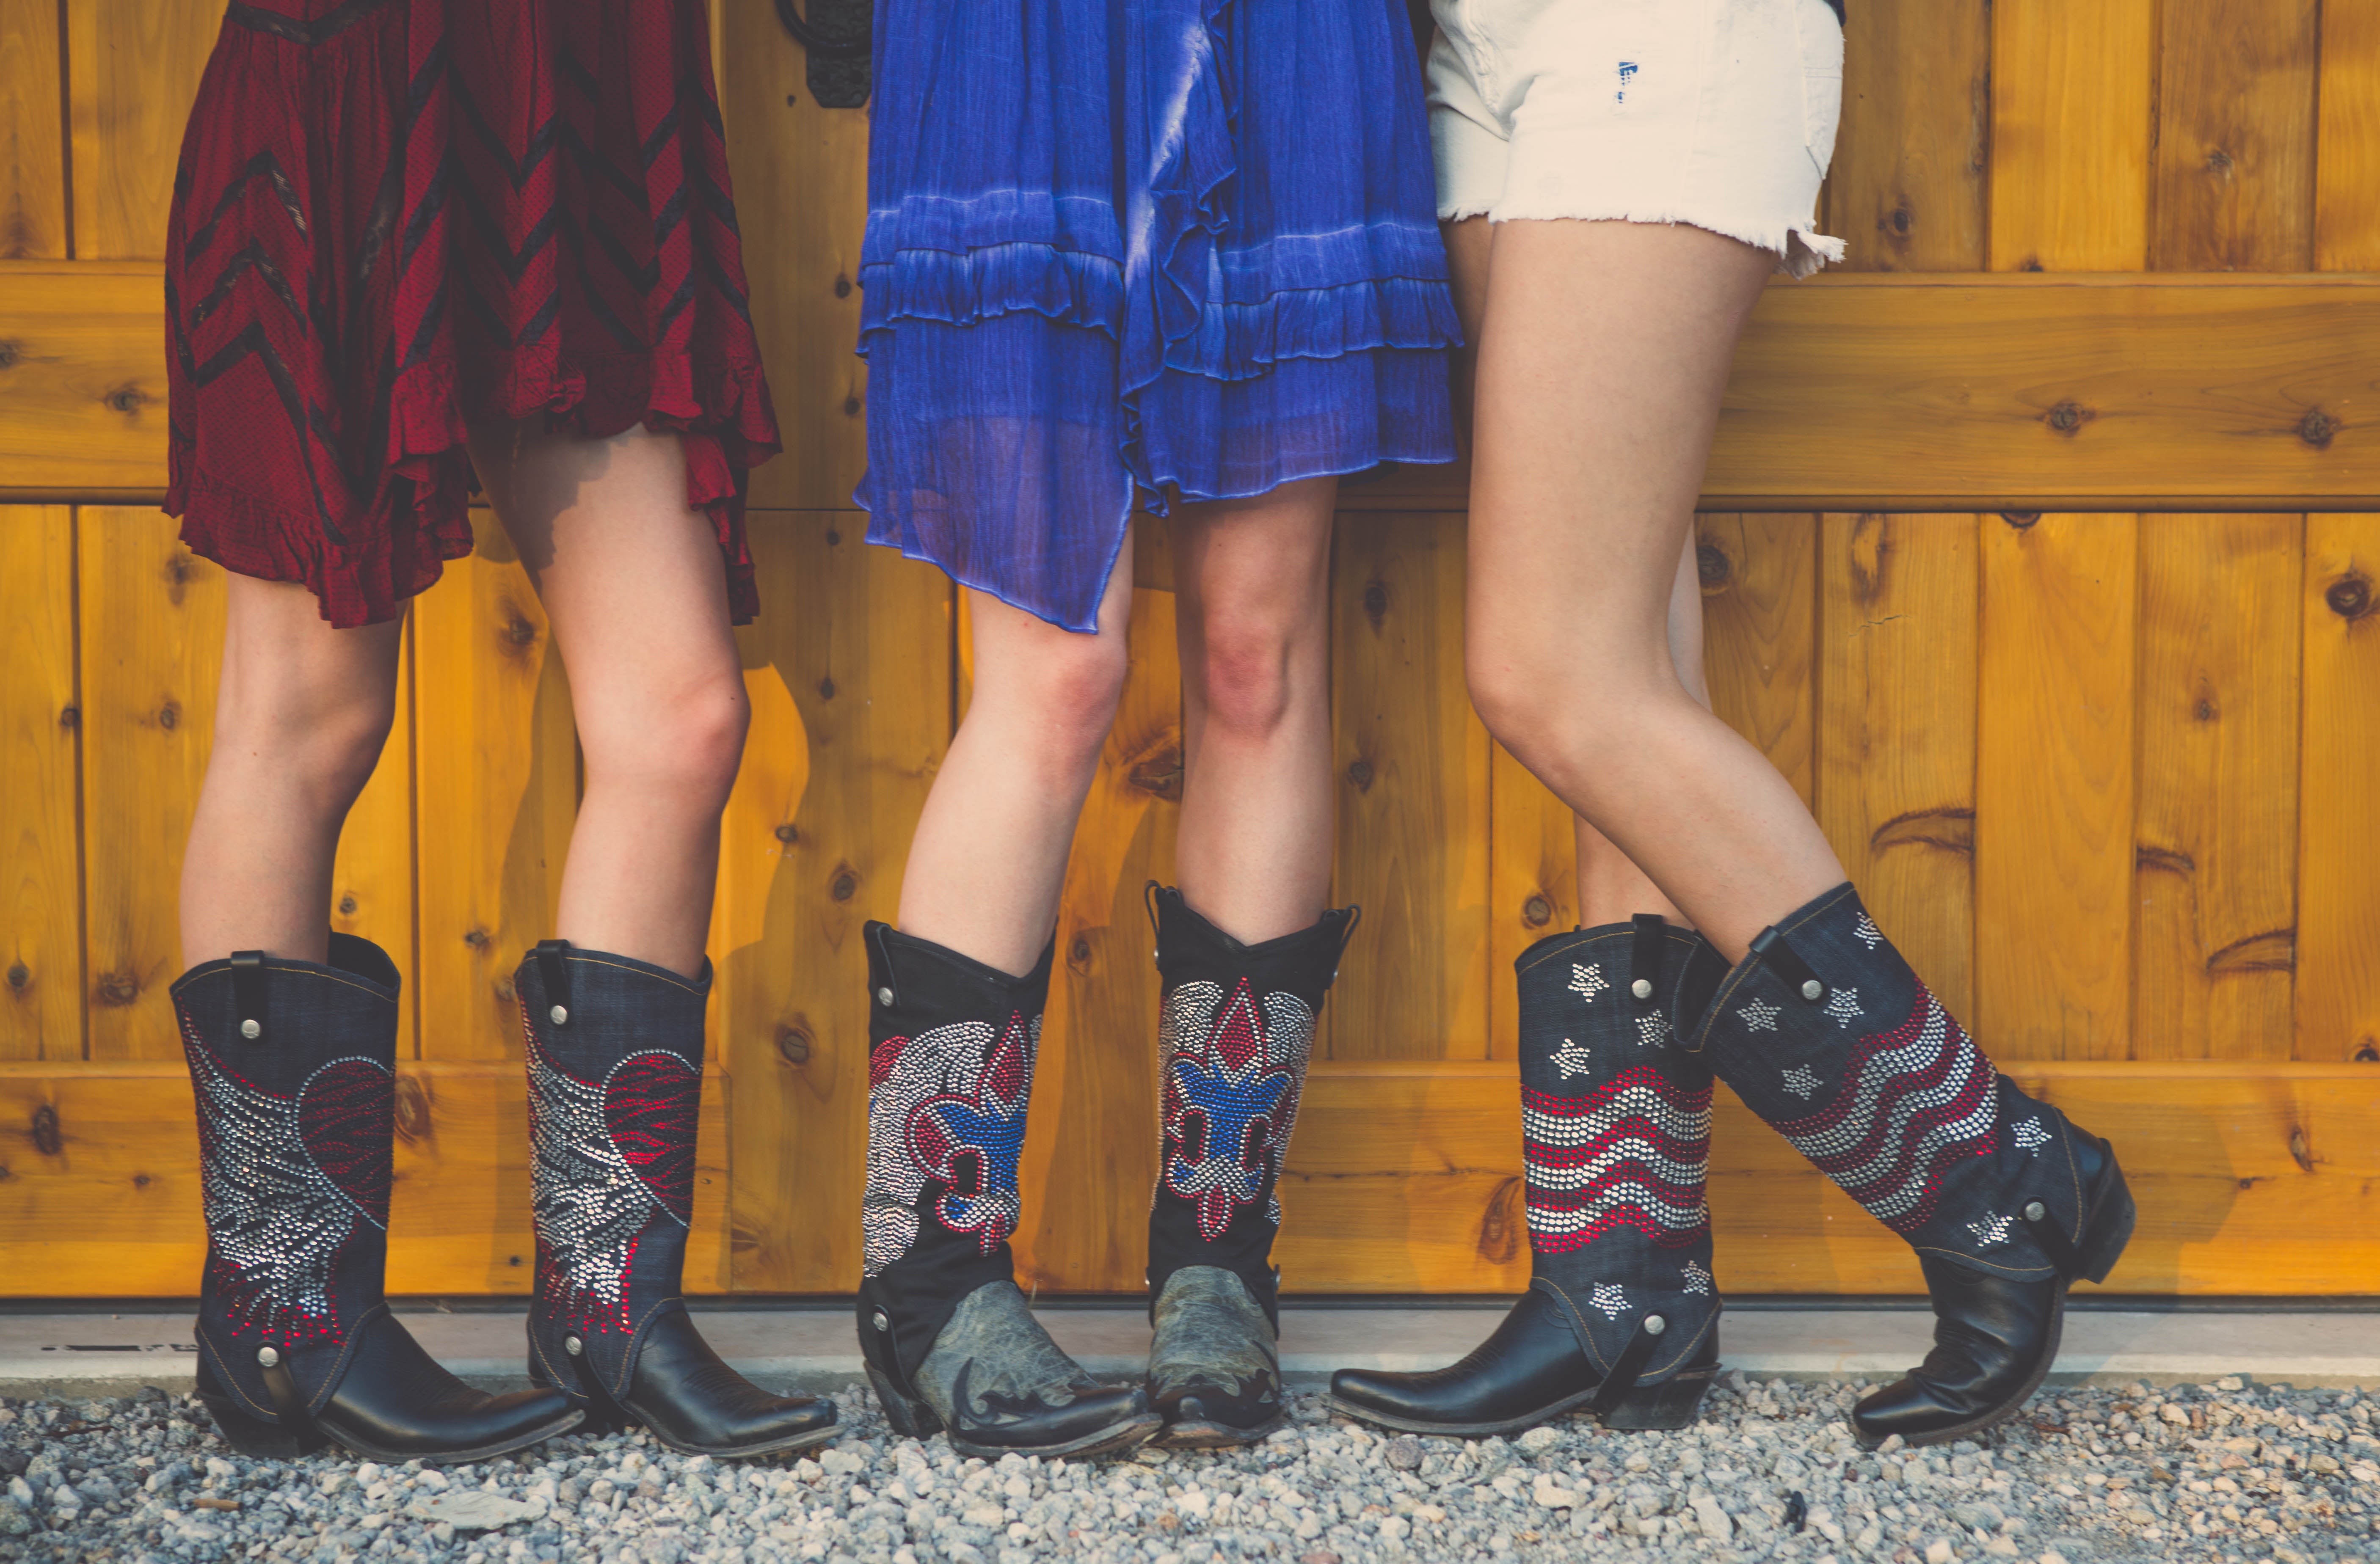 three women smiling, wearing dresses and cowgirl boots with cowboy boot covers